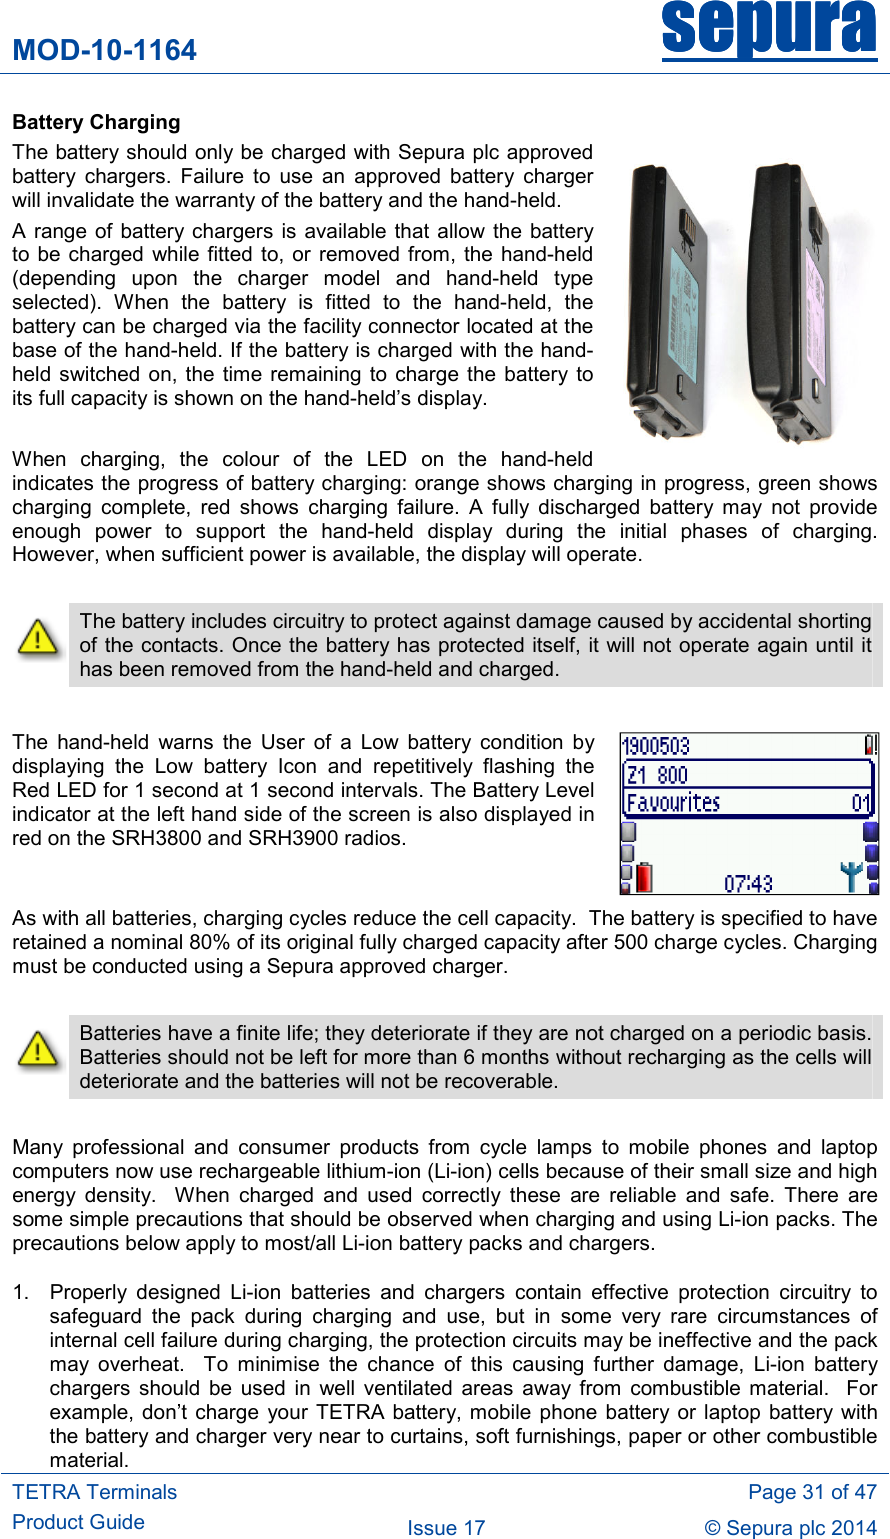 MOD-10-1164 sepurasepurasepurasepura     TETRA Terminals Product Guide   Page 31 of 47 Issue 17  © Sepura plc 2014   Battery Charging The battery should only be charged with Sepura plc approved battery  chargers.  Failure  to  use  an  approved  battery  charger will invalidate the warranty of the battery and the hand-held. A range of battery chargers is available that allow the battery to be charged  while  fitted to, or  removed from, the hand-held (depending  upon  the  charger  model  and  hand-held  type selected).  When  the  battery  is  fitted  to  the  hand-held,  the battery can be charged via the facility connector located at the base of the hand-held. If the battery is charged with the hand-held switched  on, the time  remaining to charge  the battery  to its full capacity is shown on the hand-held’s display.  When  charging,  the  colour  of  the  LED  on  the  hand-held indicates the progress of battery charging: orange shows charging in progress, green shows charging  complete,  red  shows  charging  failure.  A  fully  discharged  battery  may  not  provide enough  power  to  support  the  hand-held  display  during  the  initial  phases  of  charging. However, when sufficient power is available, the display will operate.   The battery includes circuitry to protect against damage caused by accidental shorting of the contacts. Once the battery has protected itself, it will not operate again until it has been removed from the hand-held and charged.  The  hand-held  warns  the  User  of  a  Low  battery  condition  by displaying  the  Low  battery  Icon  and  repetitively  flashing  the Red LED for 1 second at 1 second intervals. The Battery Level indicator at the left hand side of the screen is also displayed in red on the SRH3800 and SRH3900 radios.  As with all batteries, charging cycles reduce the cell capacity.  The battery is specified to have retained a nominal 80% of its original fully charged capacity after 500 charge cycles. Charging must be conducted using a Sepura approved charger.   Batteries have a finite life; they deteriorate if they are not charged on a periodic basis.  Batteries should not be left for more than 6 months without recharging as the cells will deteriorate and the batteries will not be recoverable.  Many  professional  and  consumer  products  from  cycle  lamps  to  mobile  phones  and  laptop computers now use rechargeable lithium-ion (Li-ion) cells because of their small size and high energy  density.    When  charged  and  used  correctly  these  are  reliable  and  safe.  There  are some simple precautions that should be observed when charging and using Li-ion packs. The precautions below apply to most/all Li-ion battery packs and chargers. 1.  Properly  designed  Li-ion  batteries  and  chargers  contain  effective  protection  circuitry  to safeguard  the  pack  during  charging  and  use,  but  in  some  very  rare  circumstances  of internal cell failure during charging, the protection circuits may be ineffective and the pack may  overheat.    To  minimise  the  chance  of  this  causing  further  damage,  Li-ion  battery chargers  should  be  used  in  well  ventilated  areas  away  from  combustible material.    For example,  don’t  charge  your TETRA  battery, mobile phone  battery or laptop  battery with the battery and charger very near to curtains, soft furnishings, paper or other combustible material. 